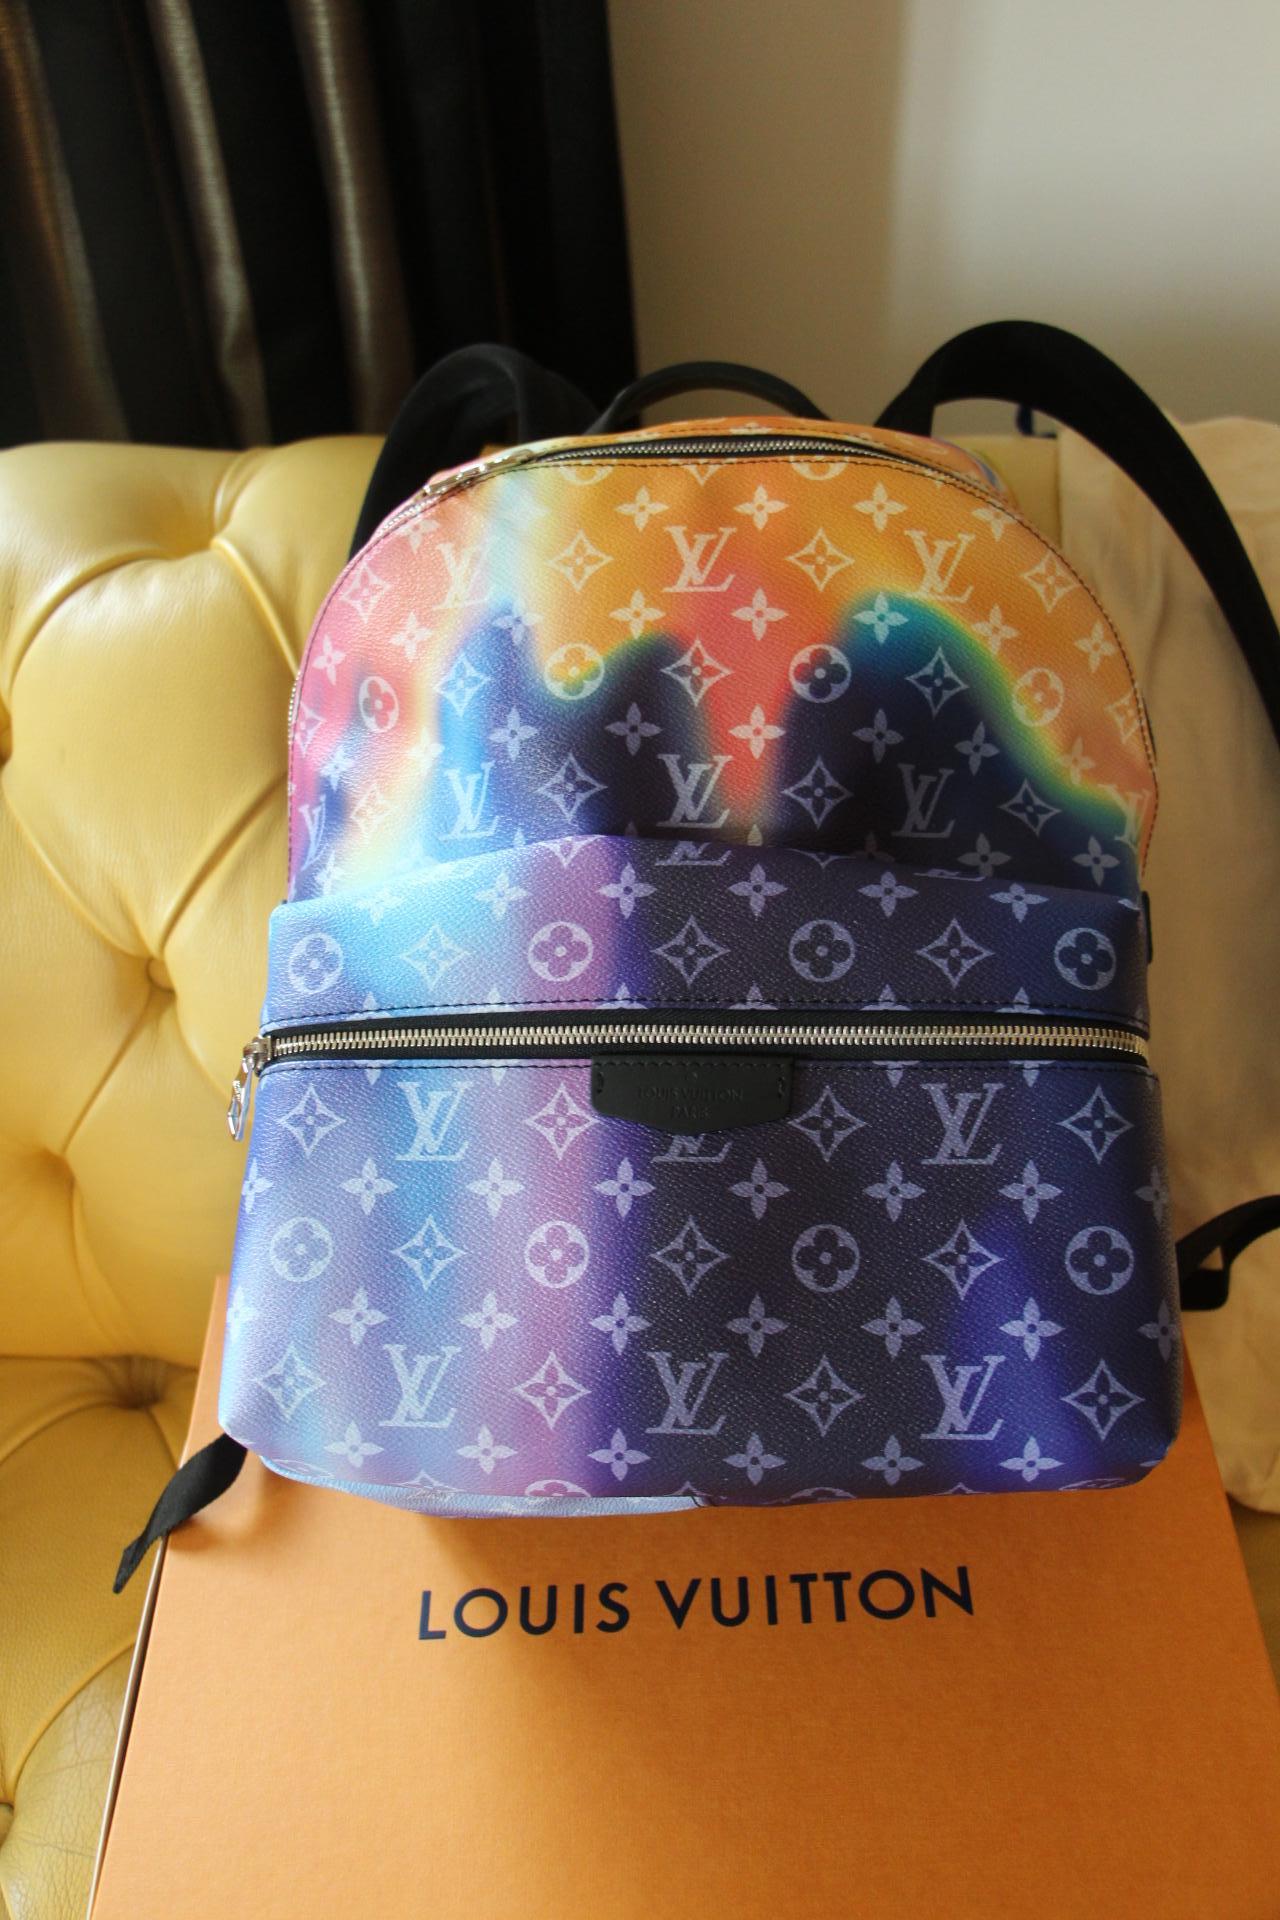 Louis Vuitton Discovery Backpack , very limited Sunset collection by Virgil Abloh 6